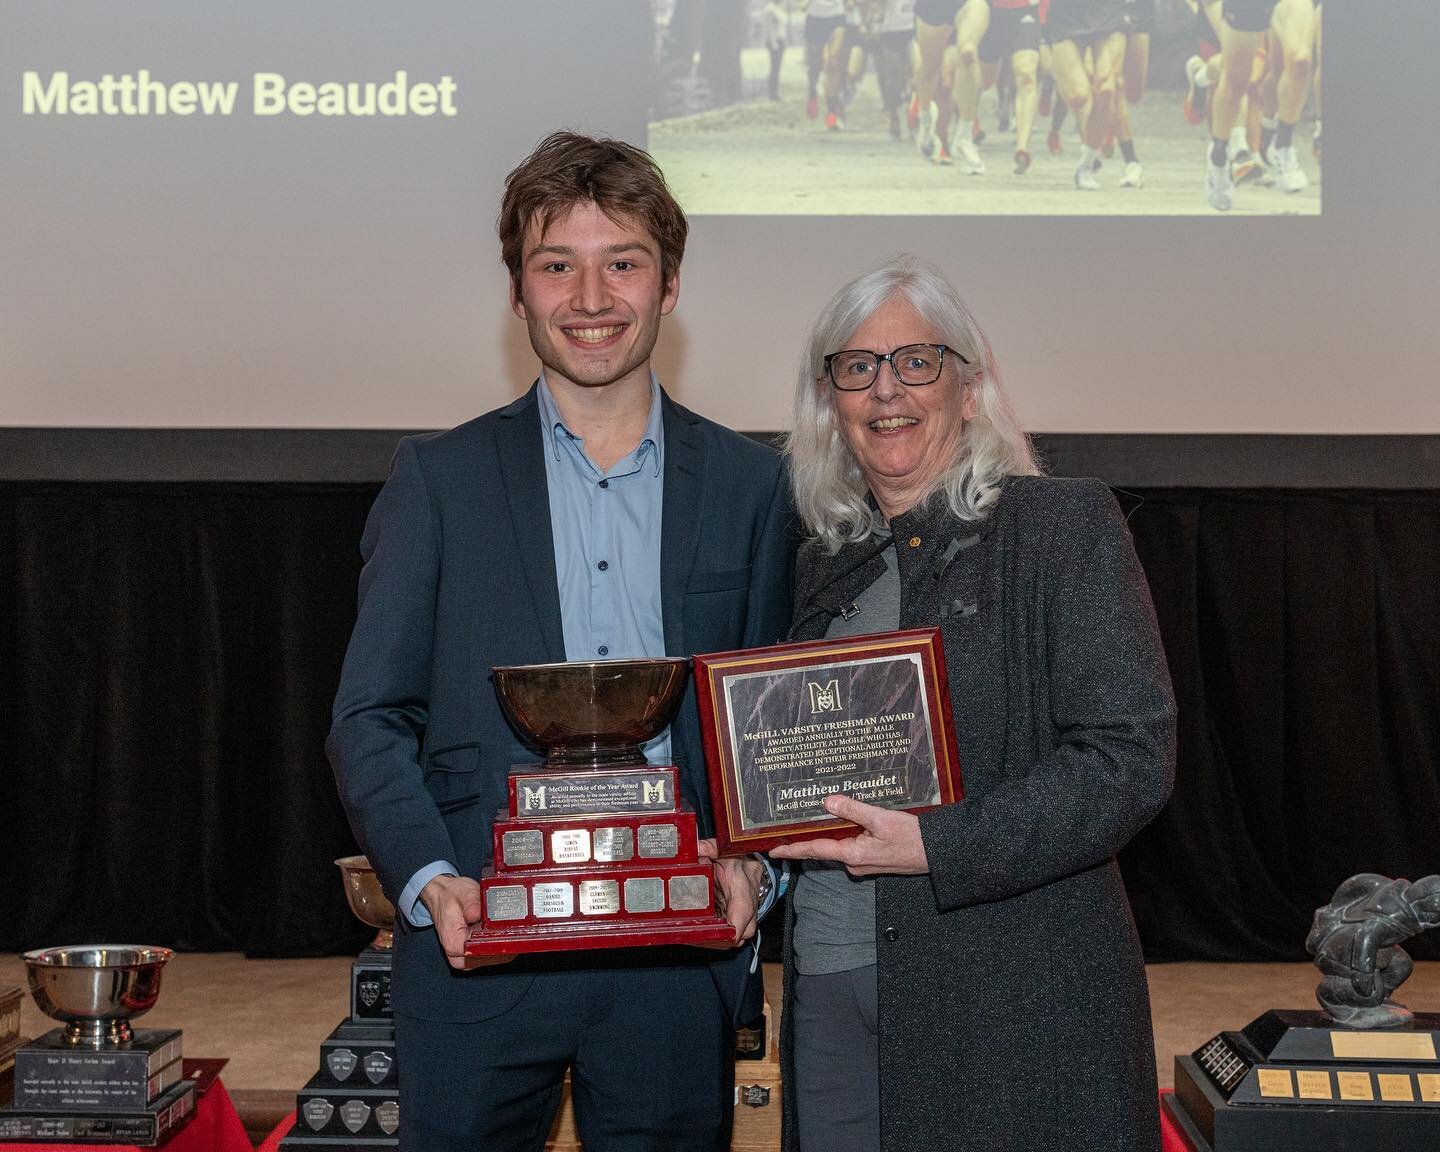 Congratulations to this year&rsquo;s Rookies of the Year. Matthew Beaudet was awarded Rookie of the Year by McGill Athletics last week. At our banquet this past weekend we awarded our own Rookies of the Year as well. We can&rsquo;t wait to see what y